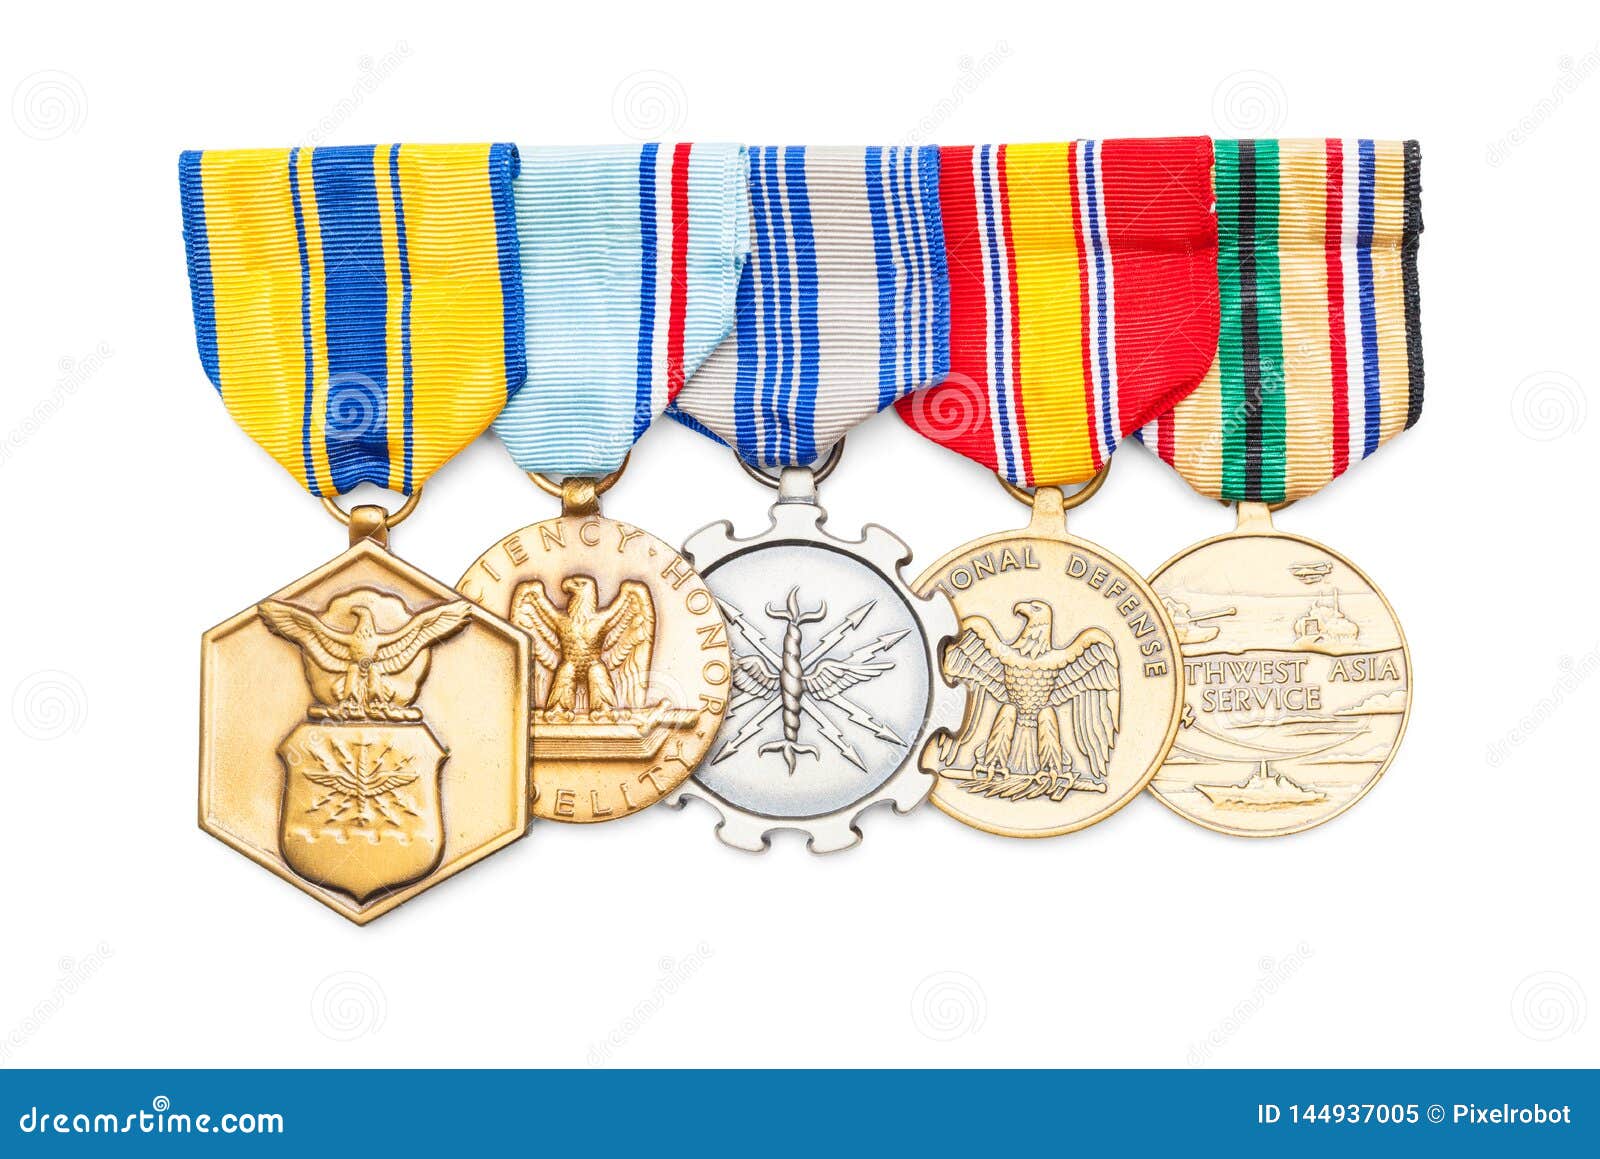 Military Medals stock image. Image of military, medals - 144937005